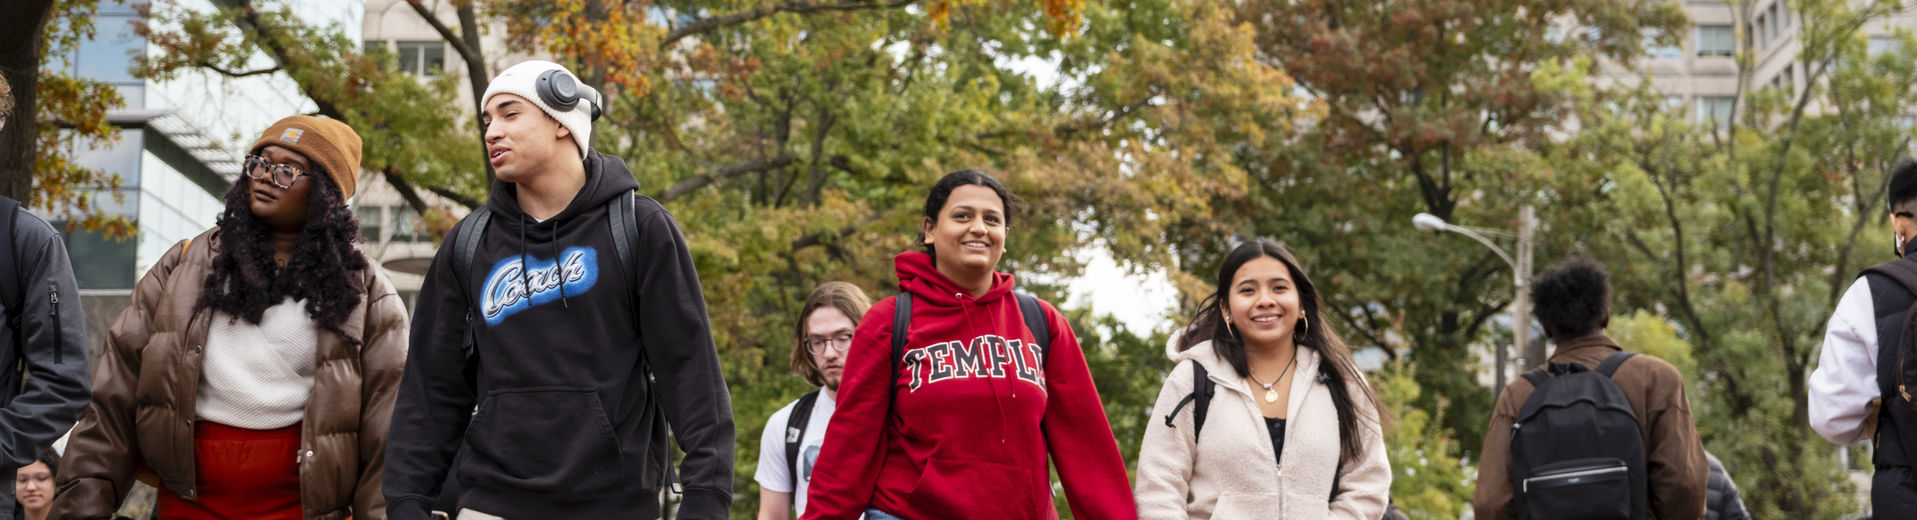 students walking across campus on a fall day.